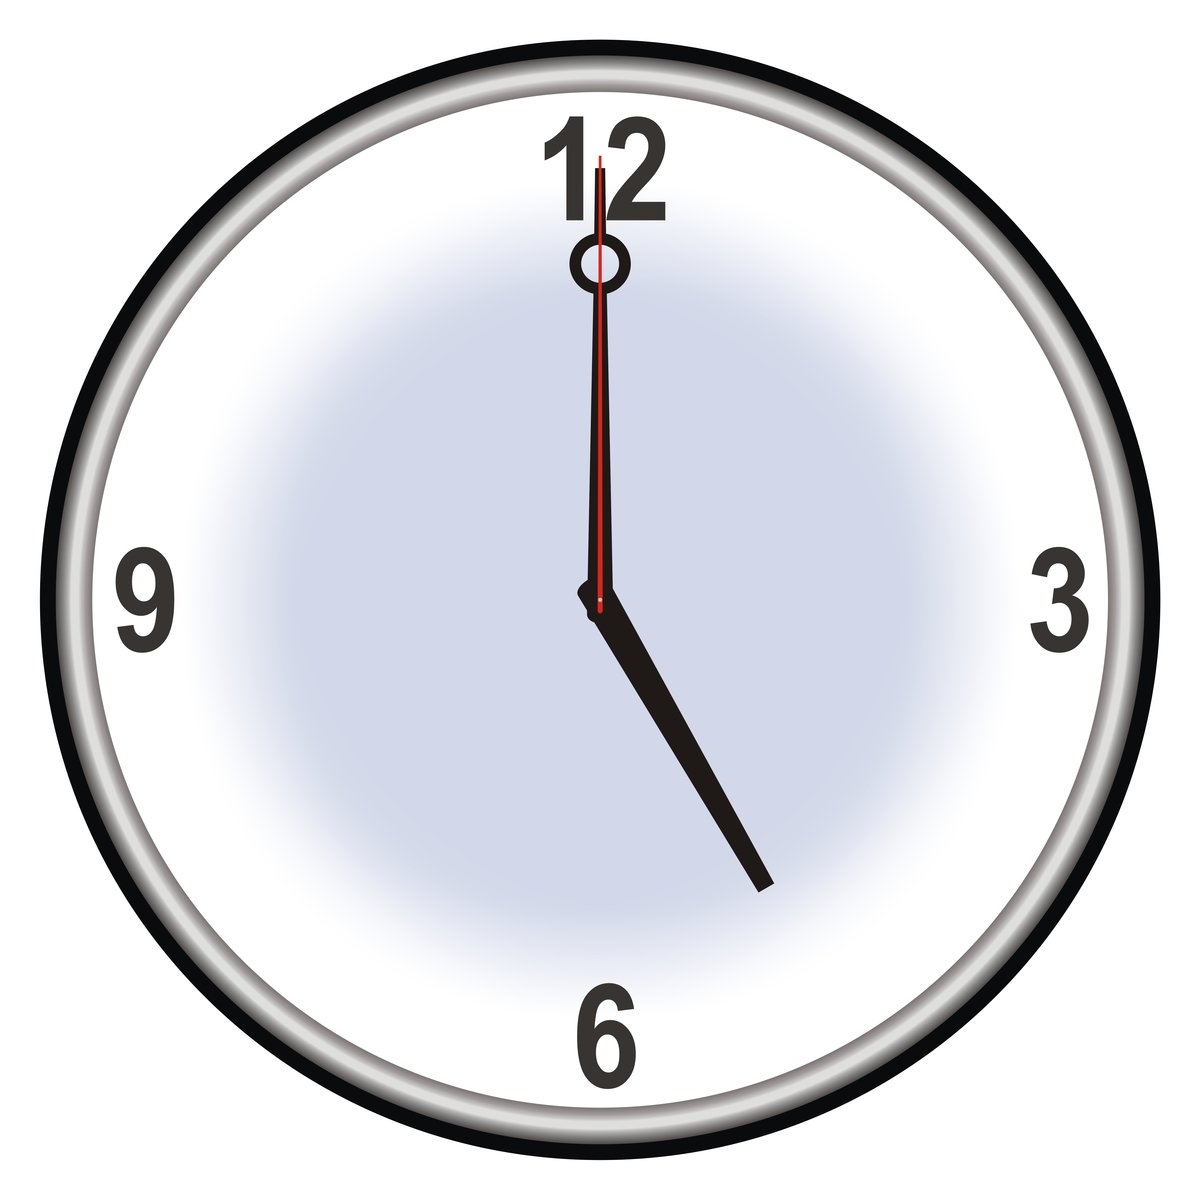 a simple clock showing eleven o'clock for the four o'clock